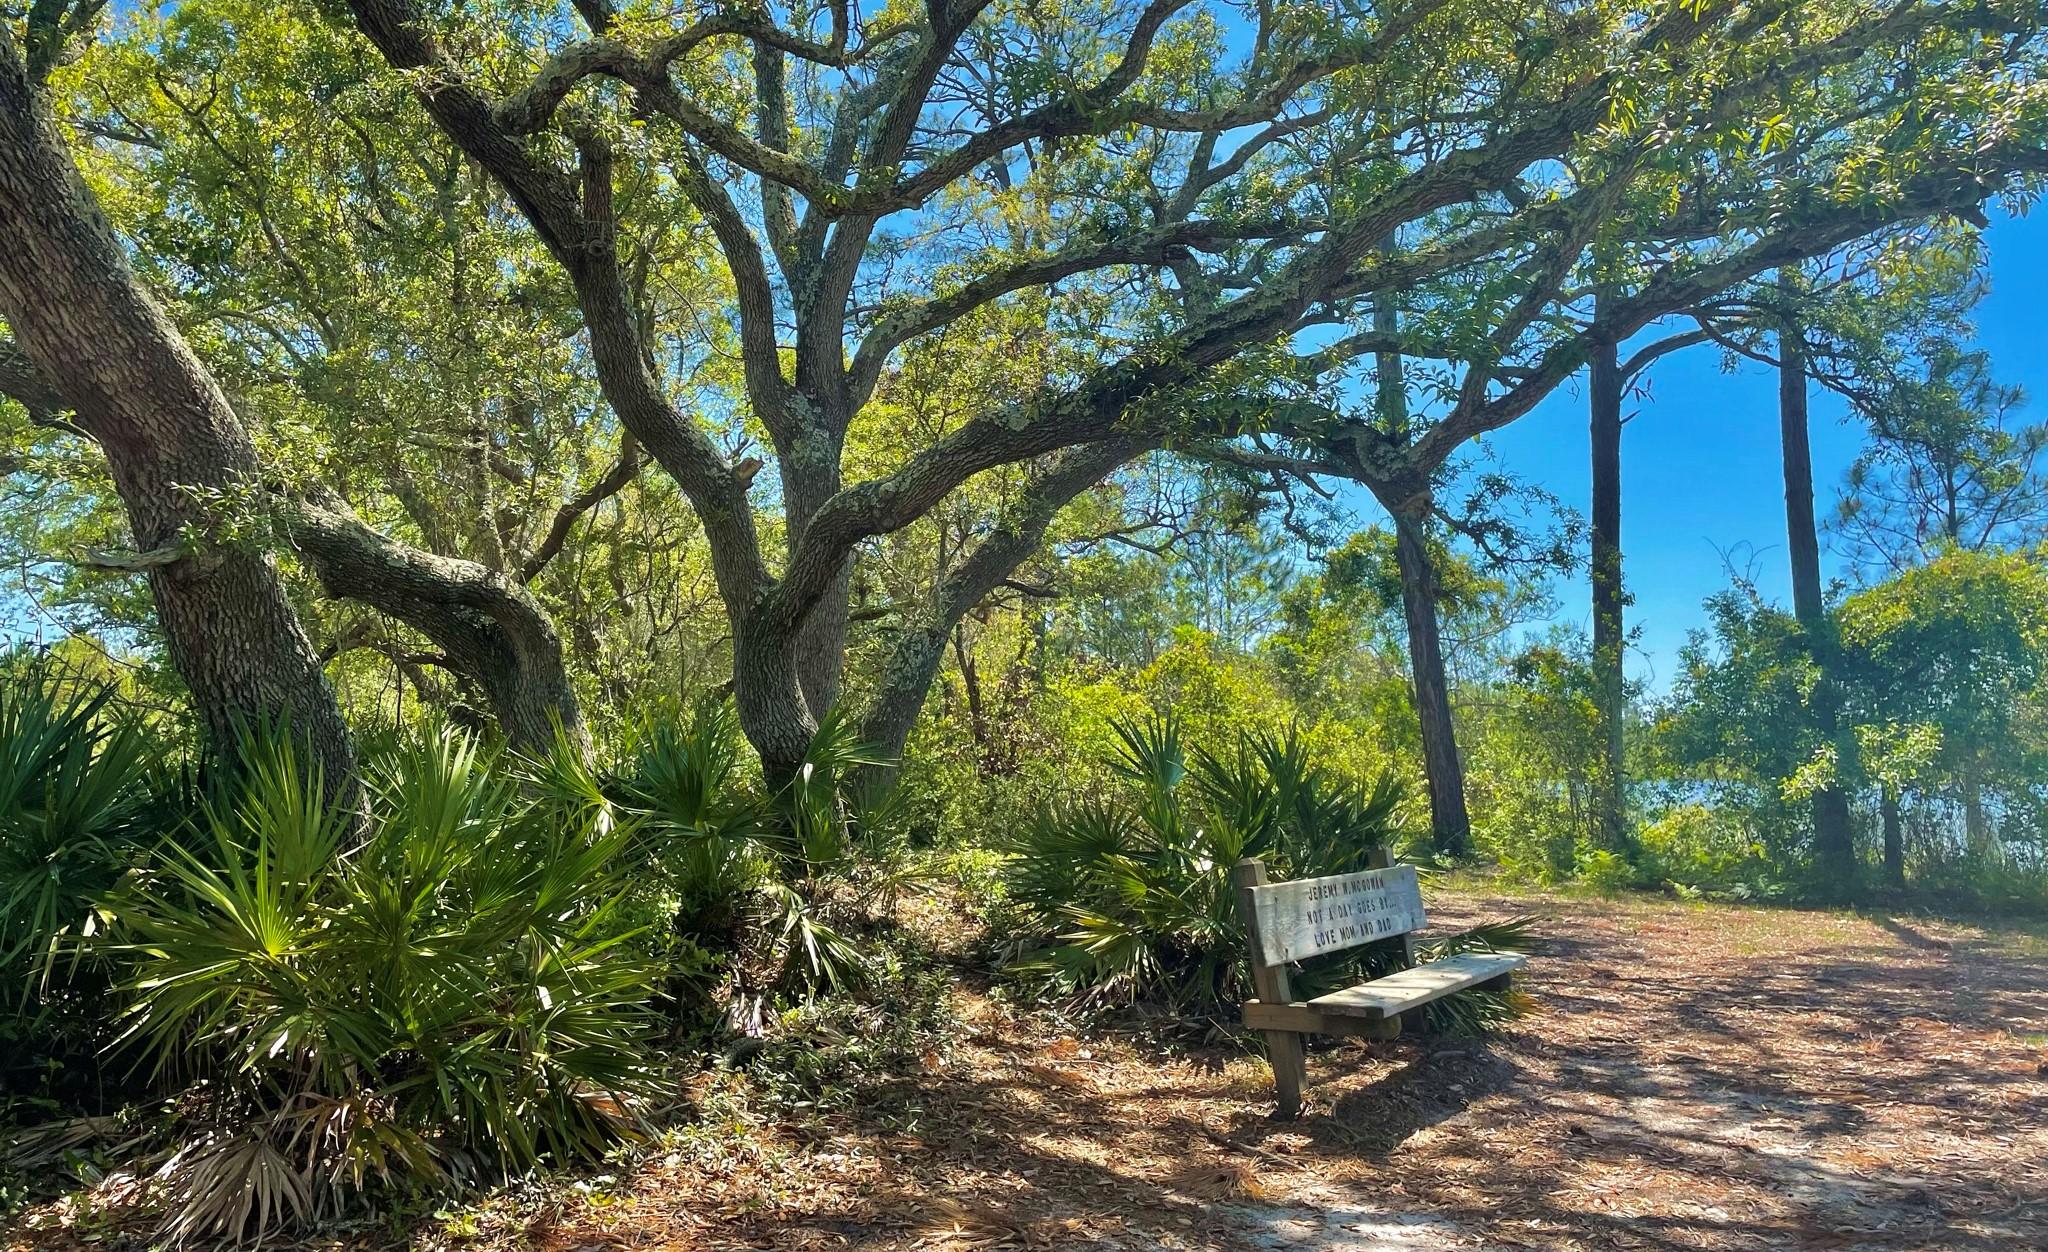 A Bench Under a Live Oak Tree Offers the Best Place to Relax